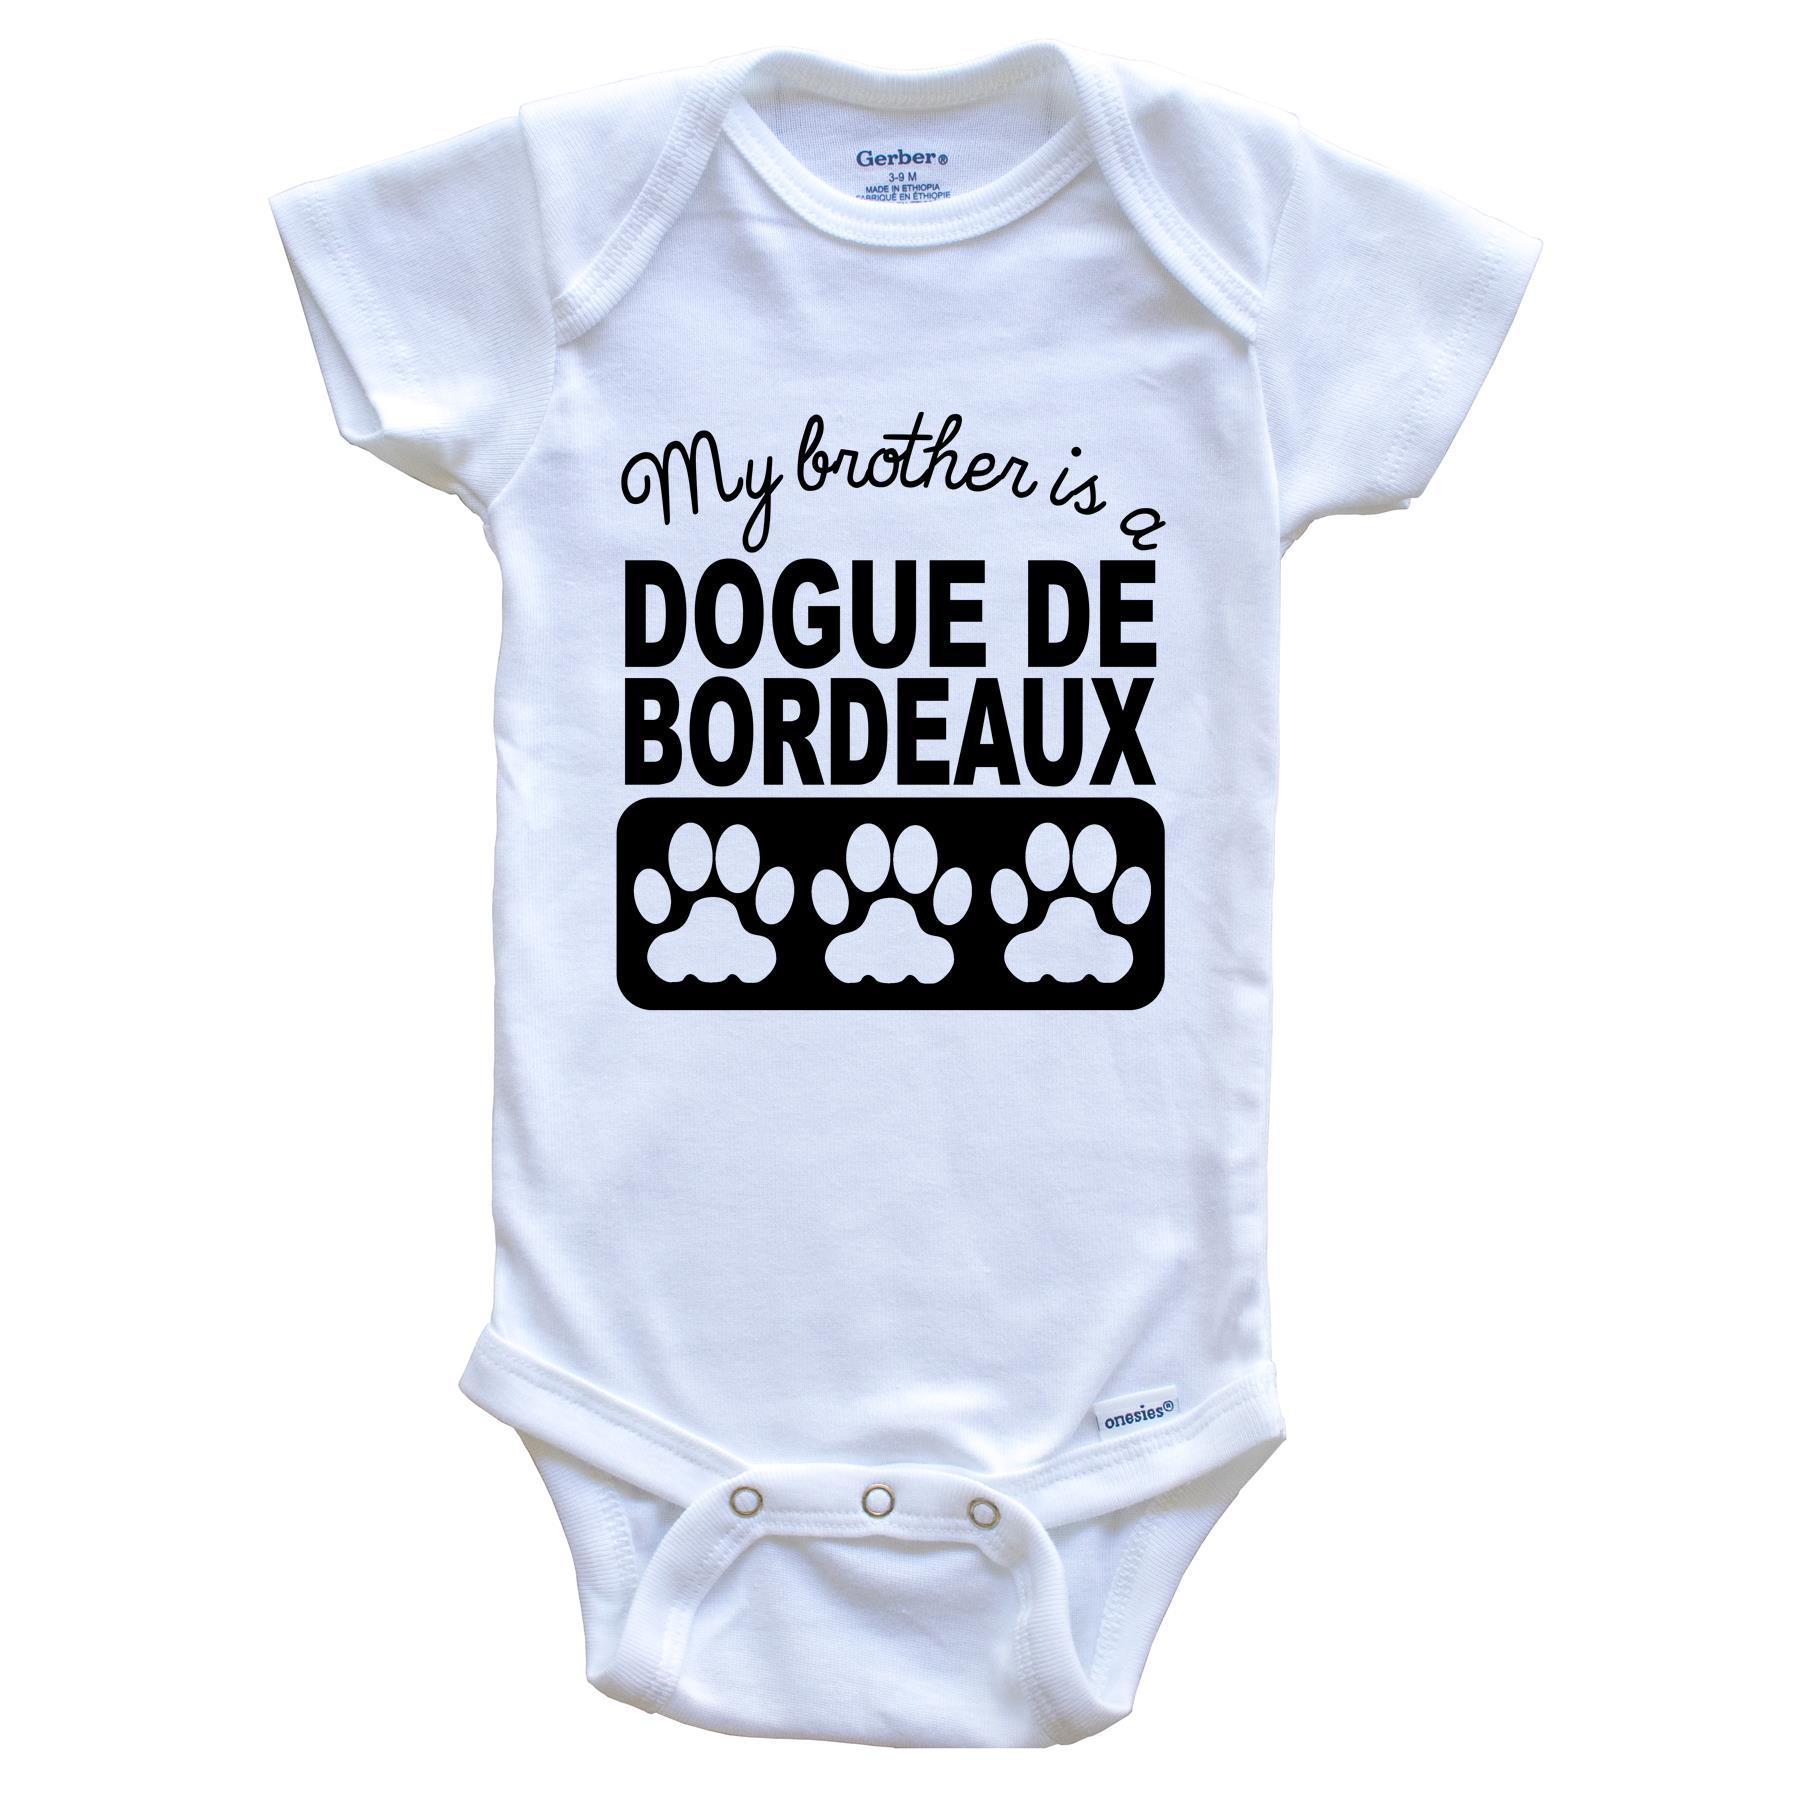 My Brother Is A Dogue de Bordeaux Baby Onesie